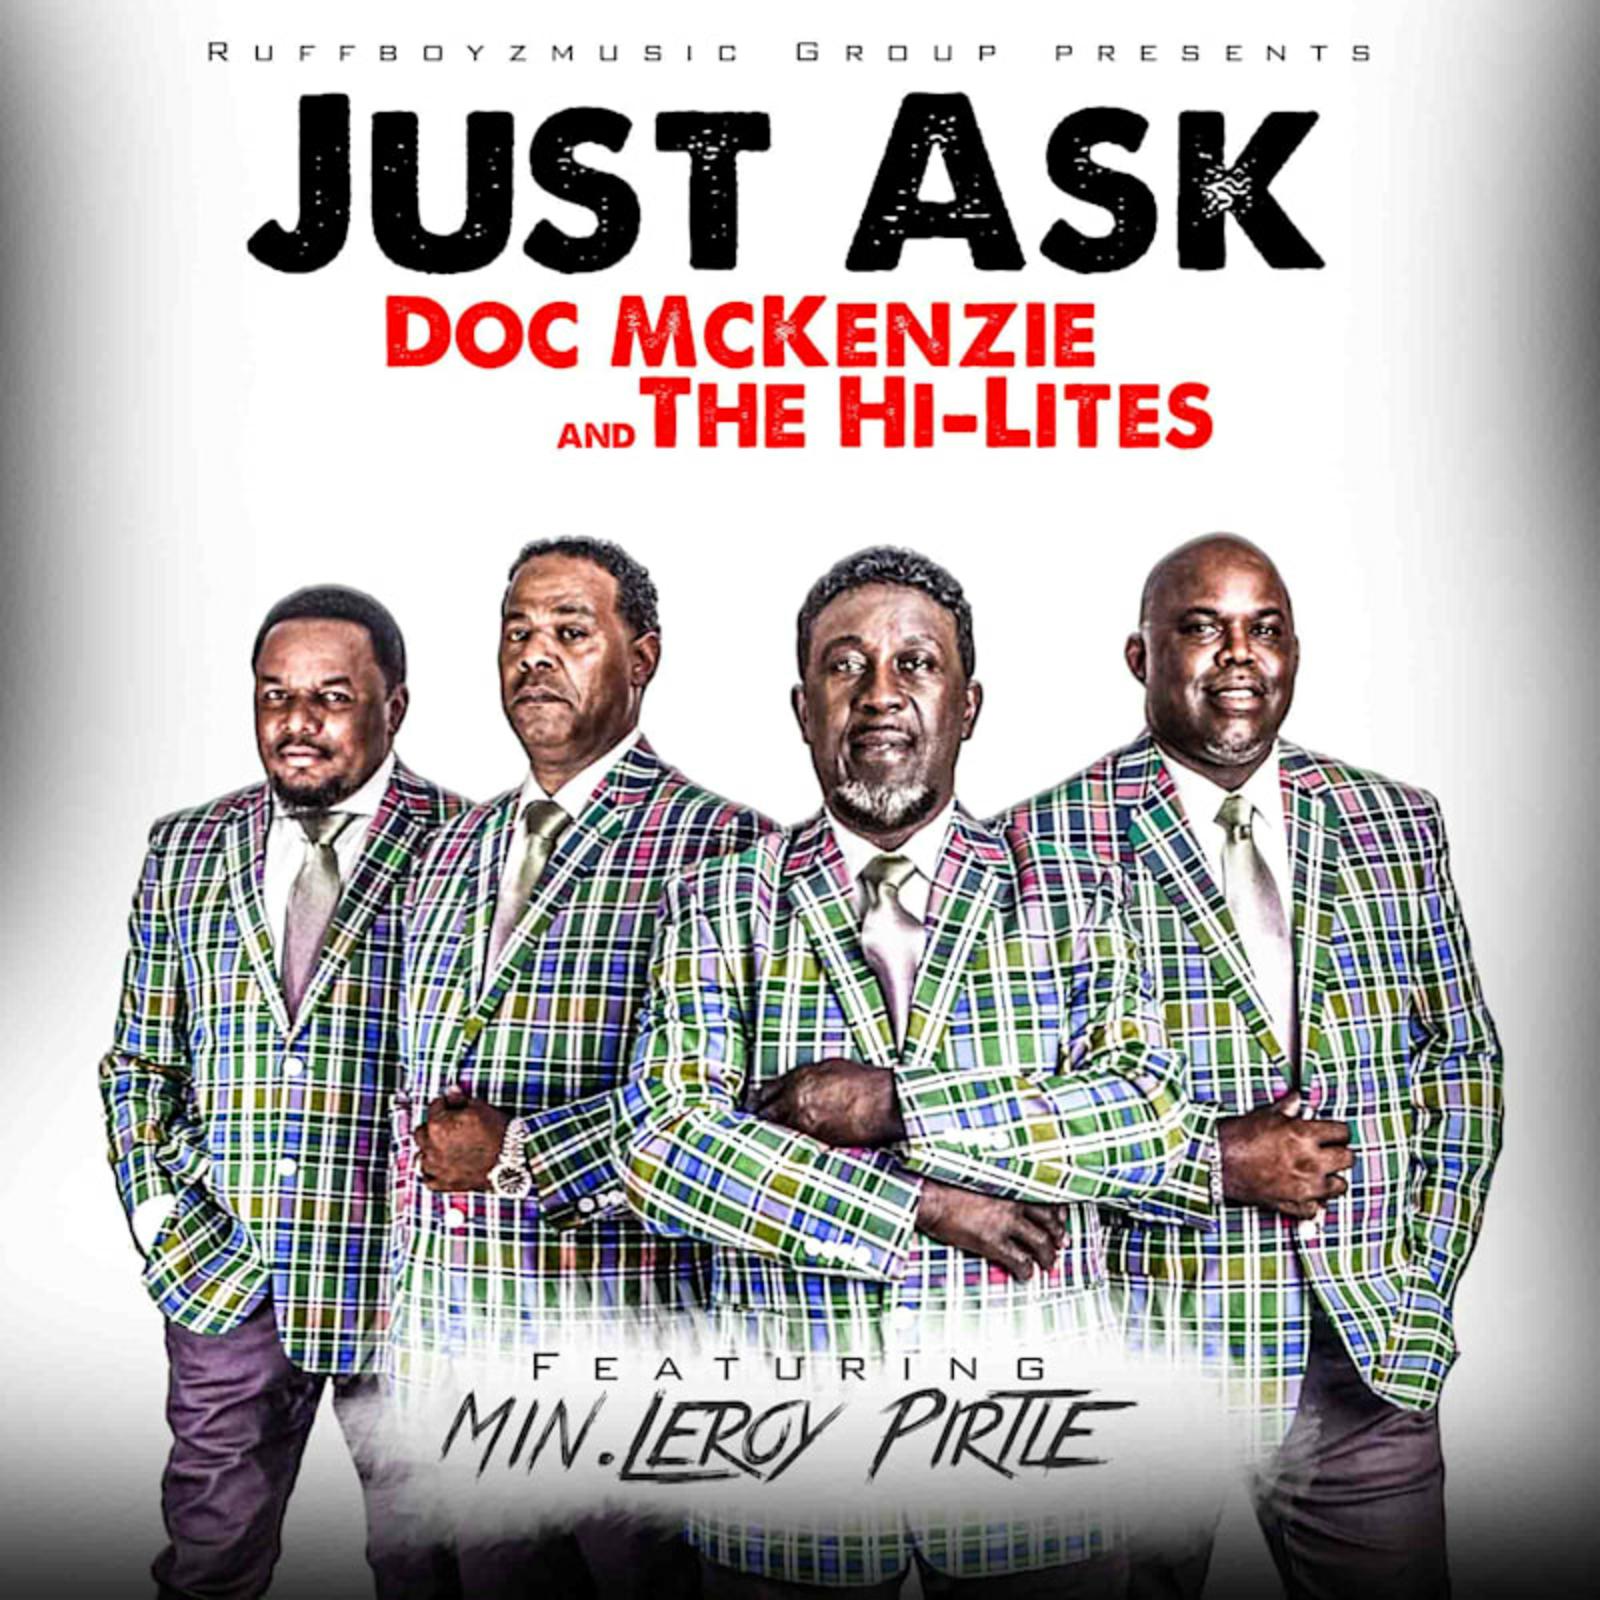 Art for Just Ask by Doc McKenzie and The Hi-Lites Feat.Min Leroy Pirtle